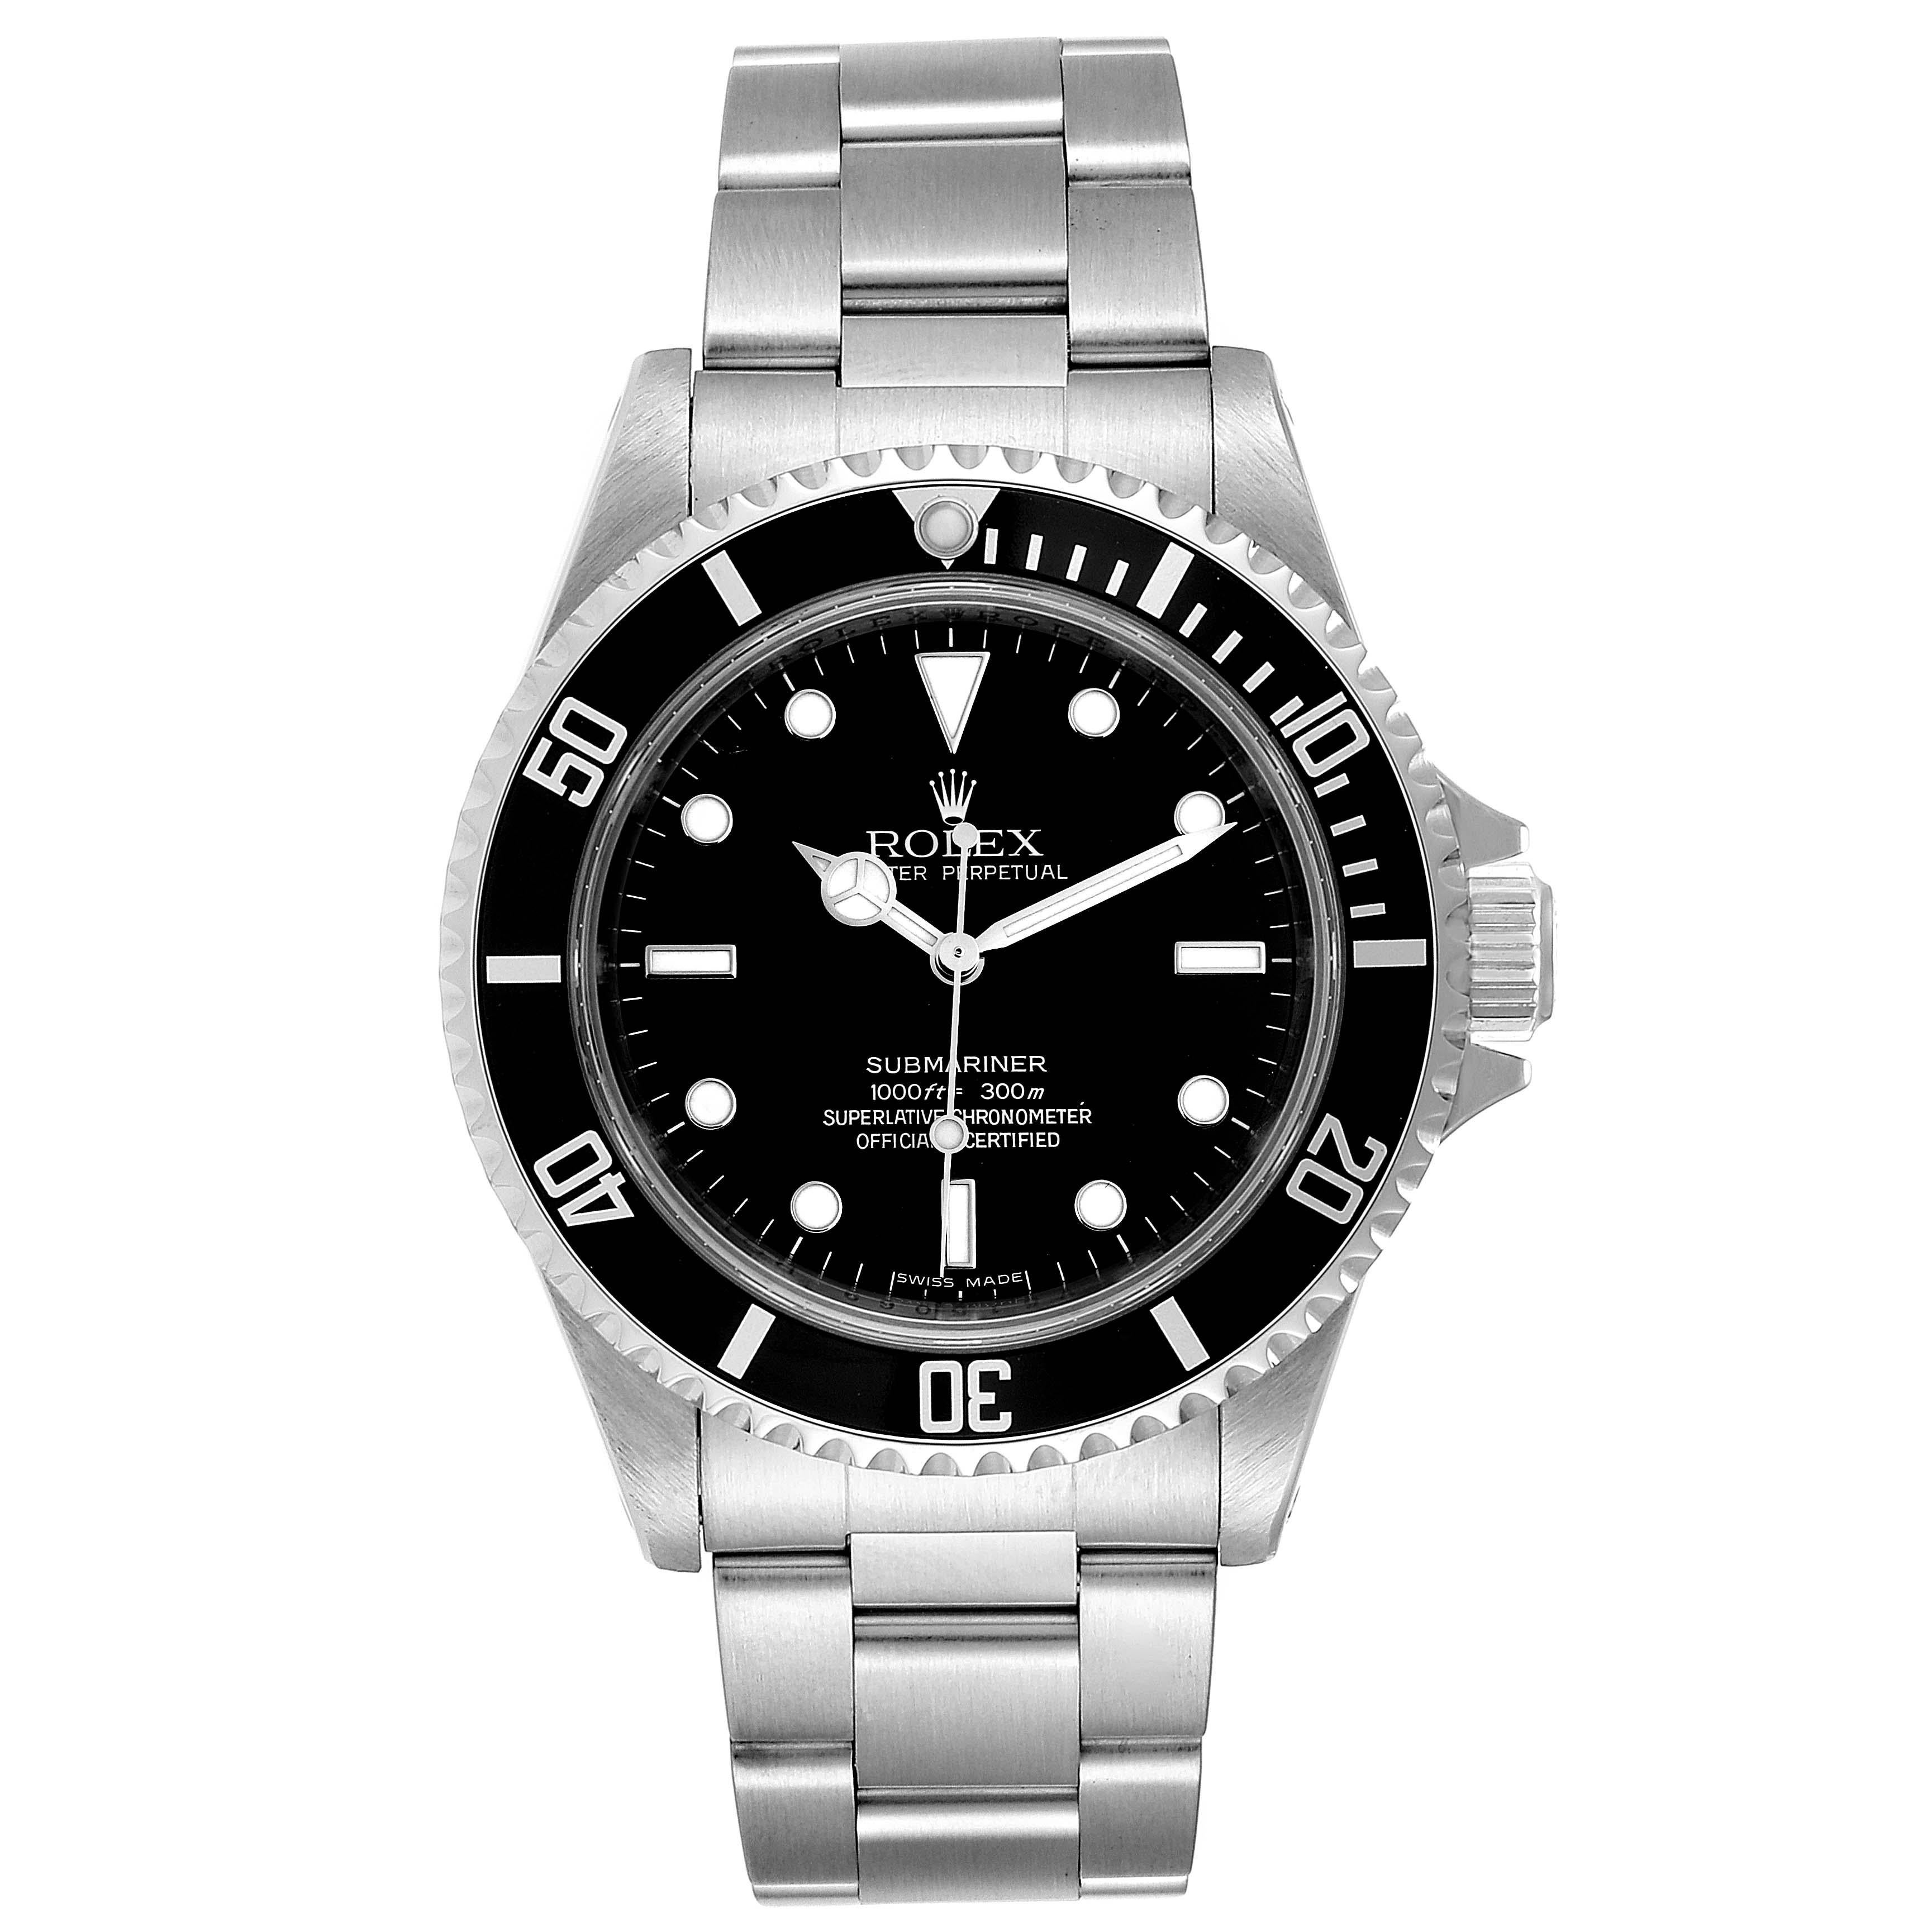 Rolex Submariner 40mm Non-Date 4 Liner Steel Steel Mens Watch 14060. Automatic self-winding movement. Stainless steel case 40.0 mm in diameter. Rolex logo on a crown. Special time-lapse unidirectional rotating bezel. Scratch resistant sapphire